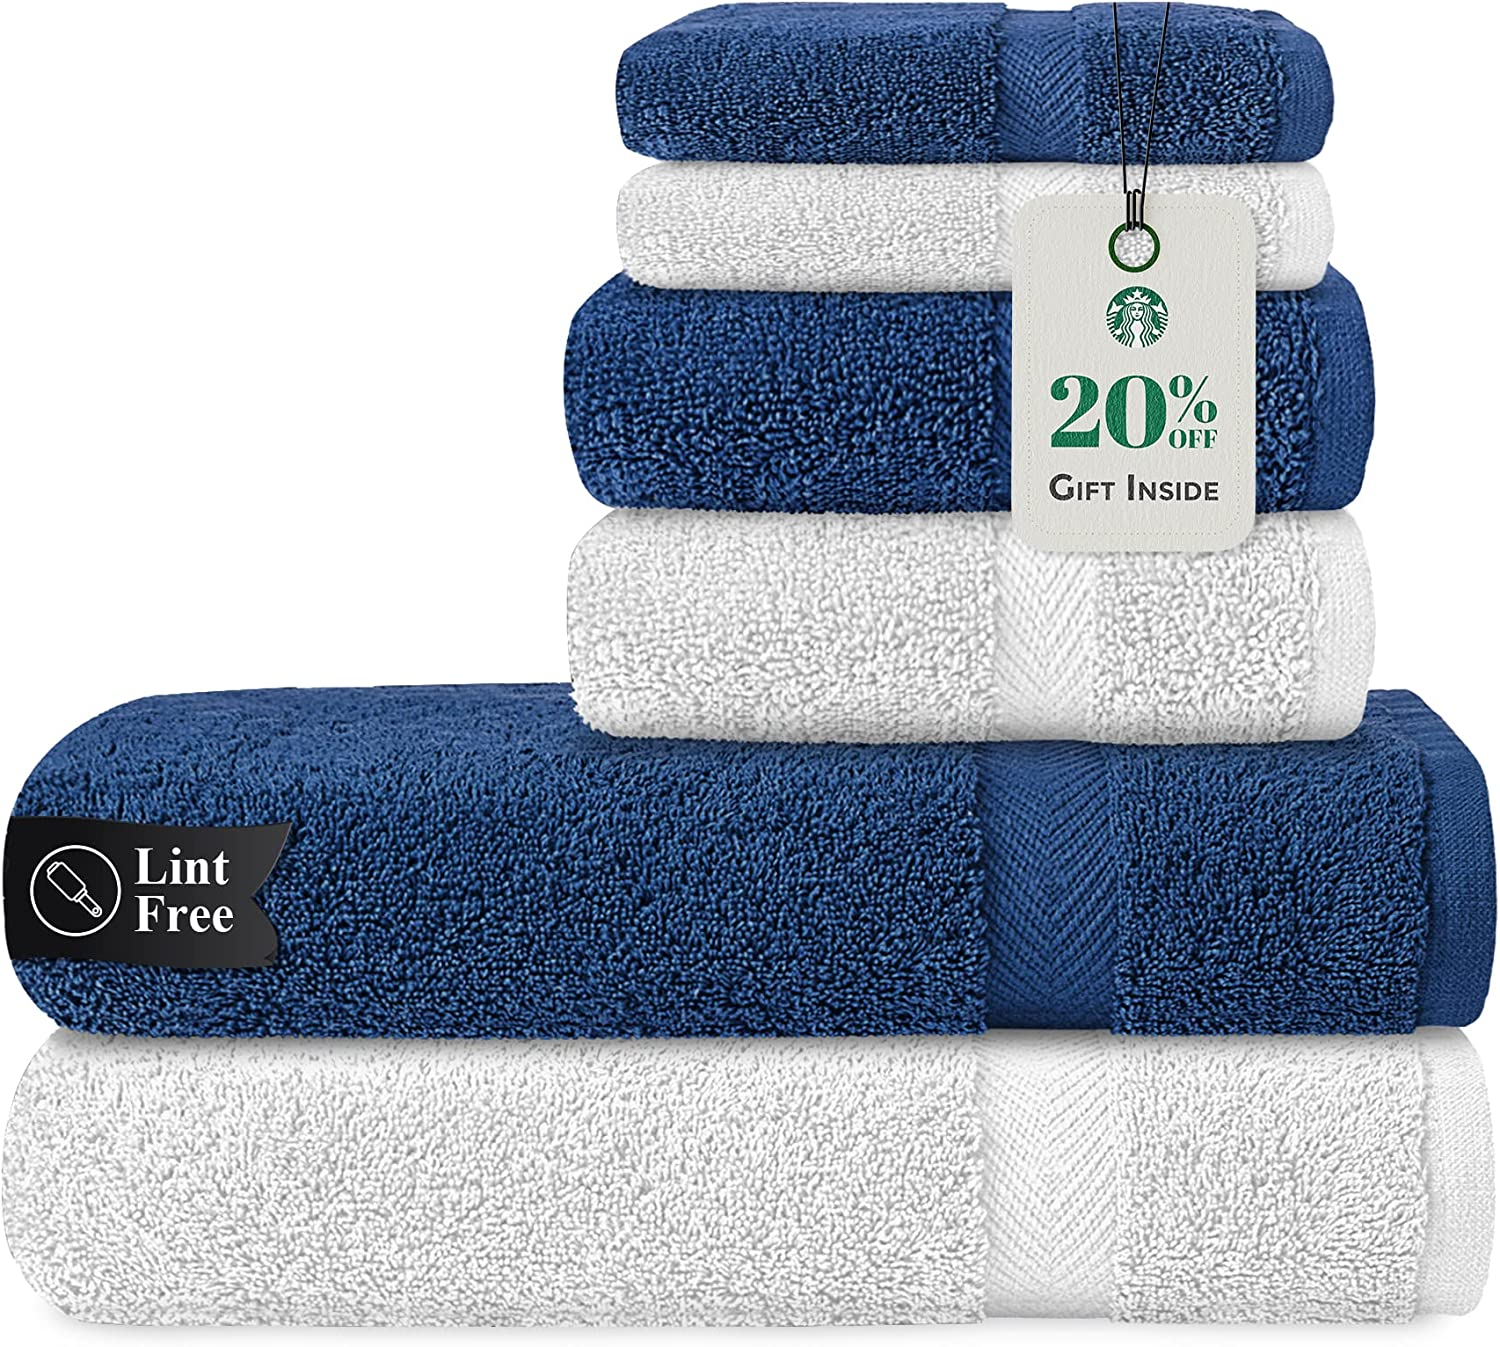 Stony Edge Towel Set, 1 Bath Towel, 1 Hand Towel & 2 Face Towels, 100% Cotton, 600 GSM, Soft & Absorbent for Bathroom, Kitchen, Gym & Spa, Gray